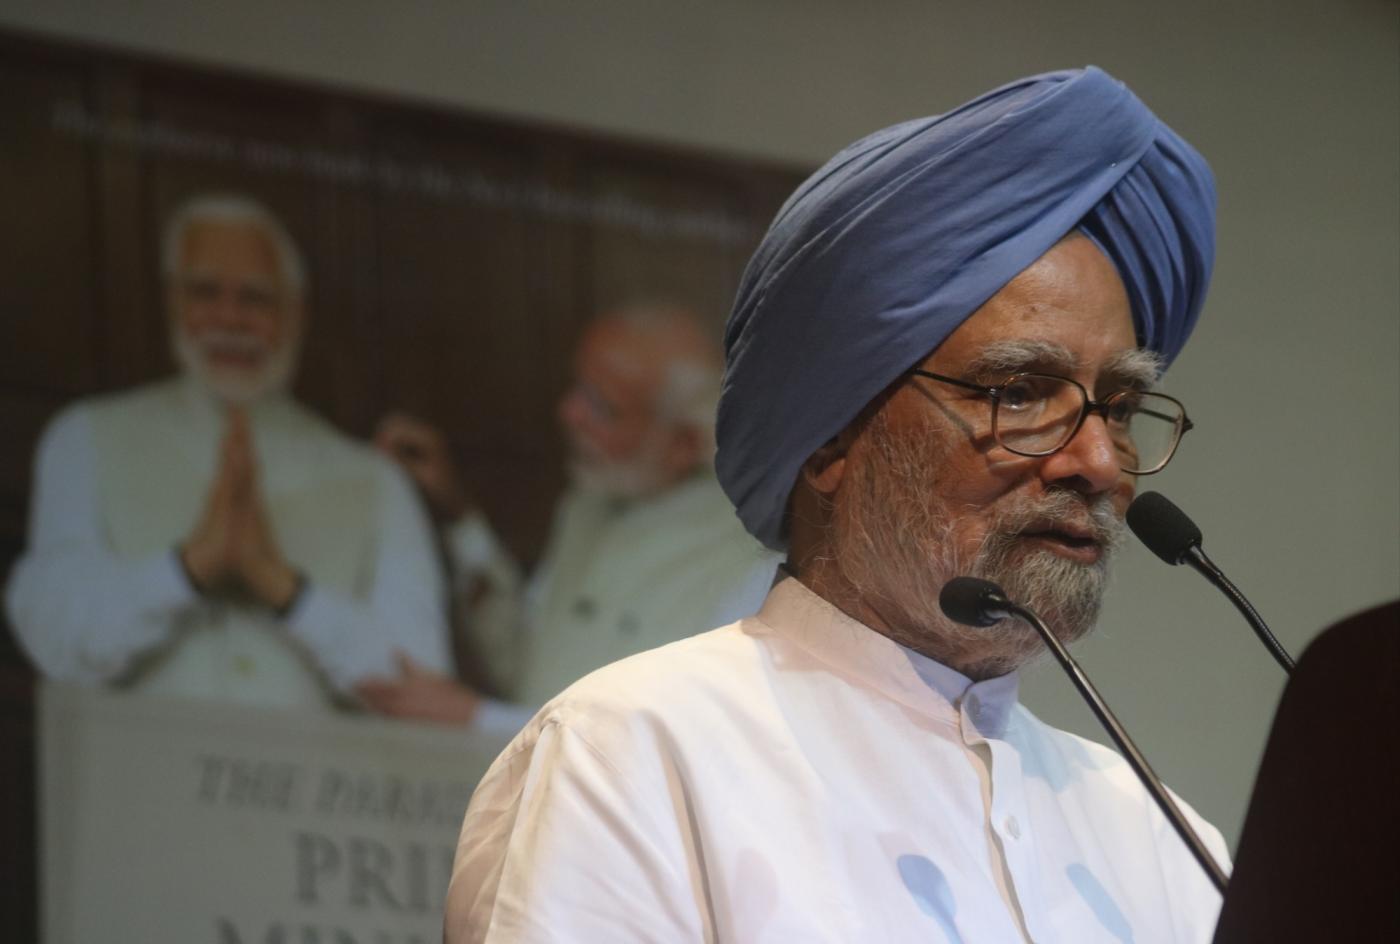 New Delhi: Former Prime Minister and Congress leader Dr. Manmohan Singh addresses at the launch of Shashi Tharoor's book "The Paradoxical Prime Minister: Narendra Modi And His India" in New Delhi on Oct 26, 2018. (Photo: IANS) by .